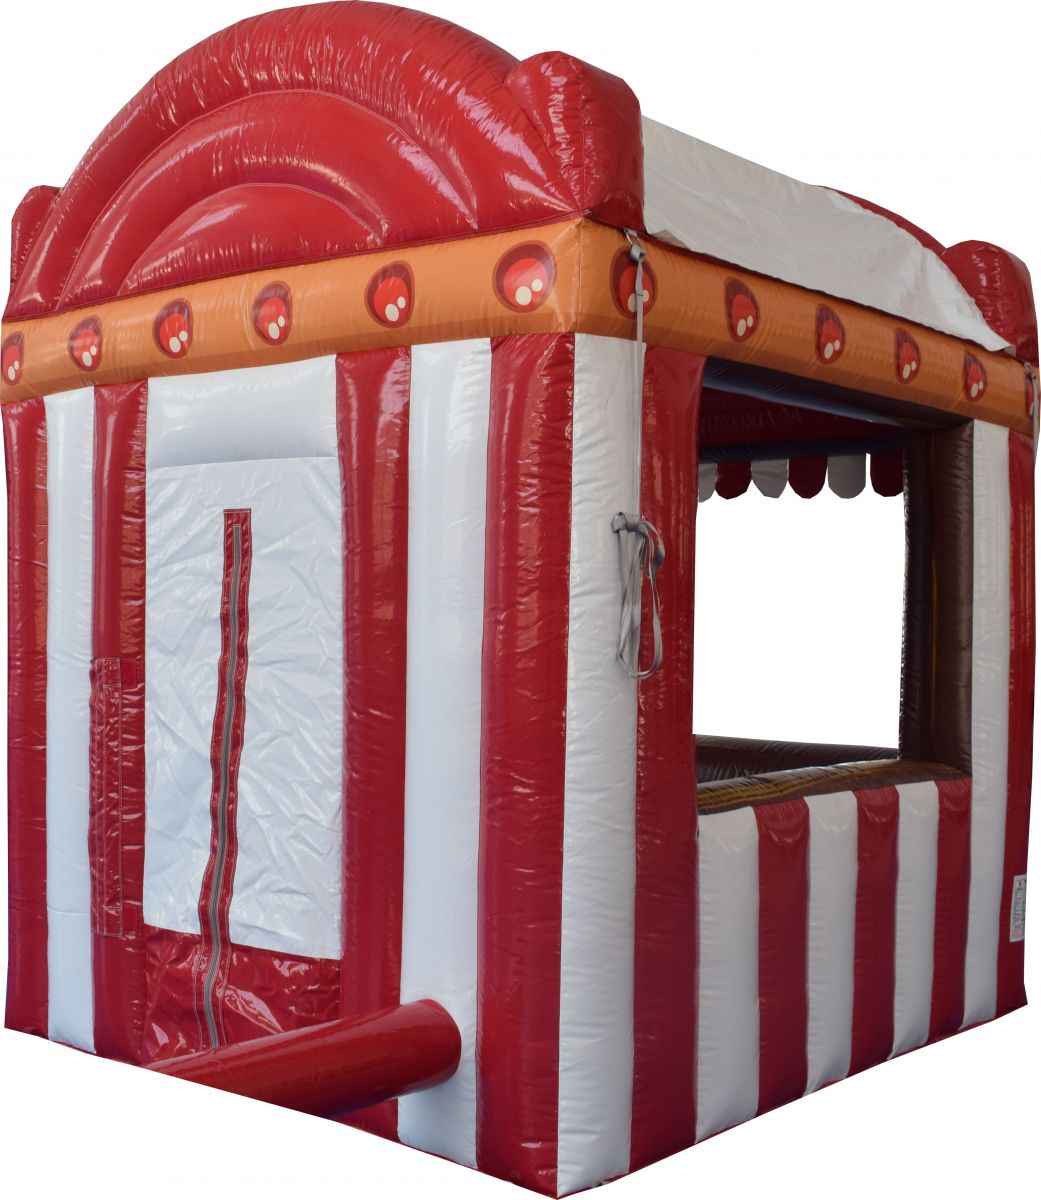 Inflatable Carnival Concession Booth Rental Chicago Illinois 